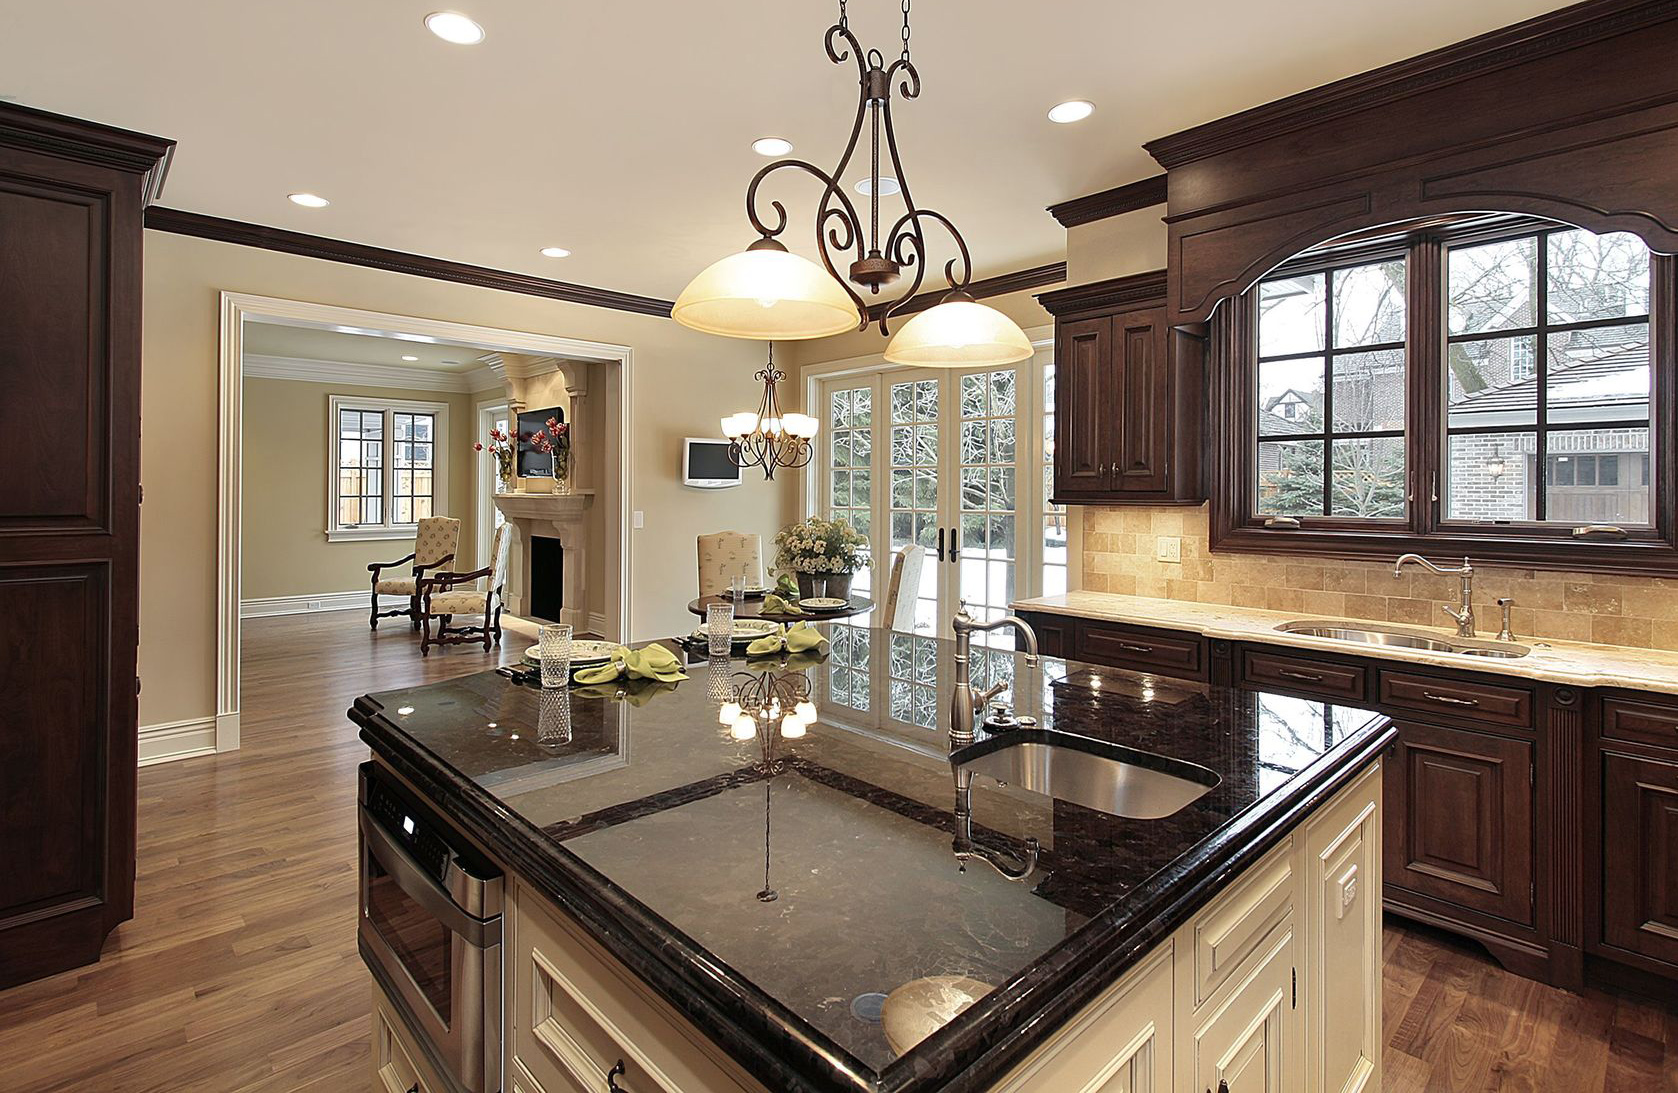 How to Select the Right Granite for Your Kitchen Countertops - Interior